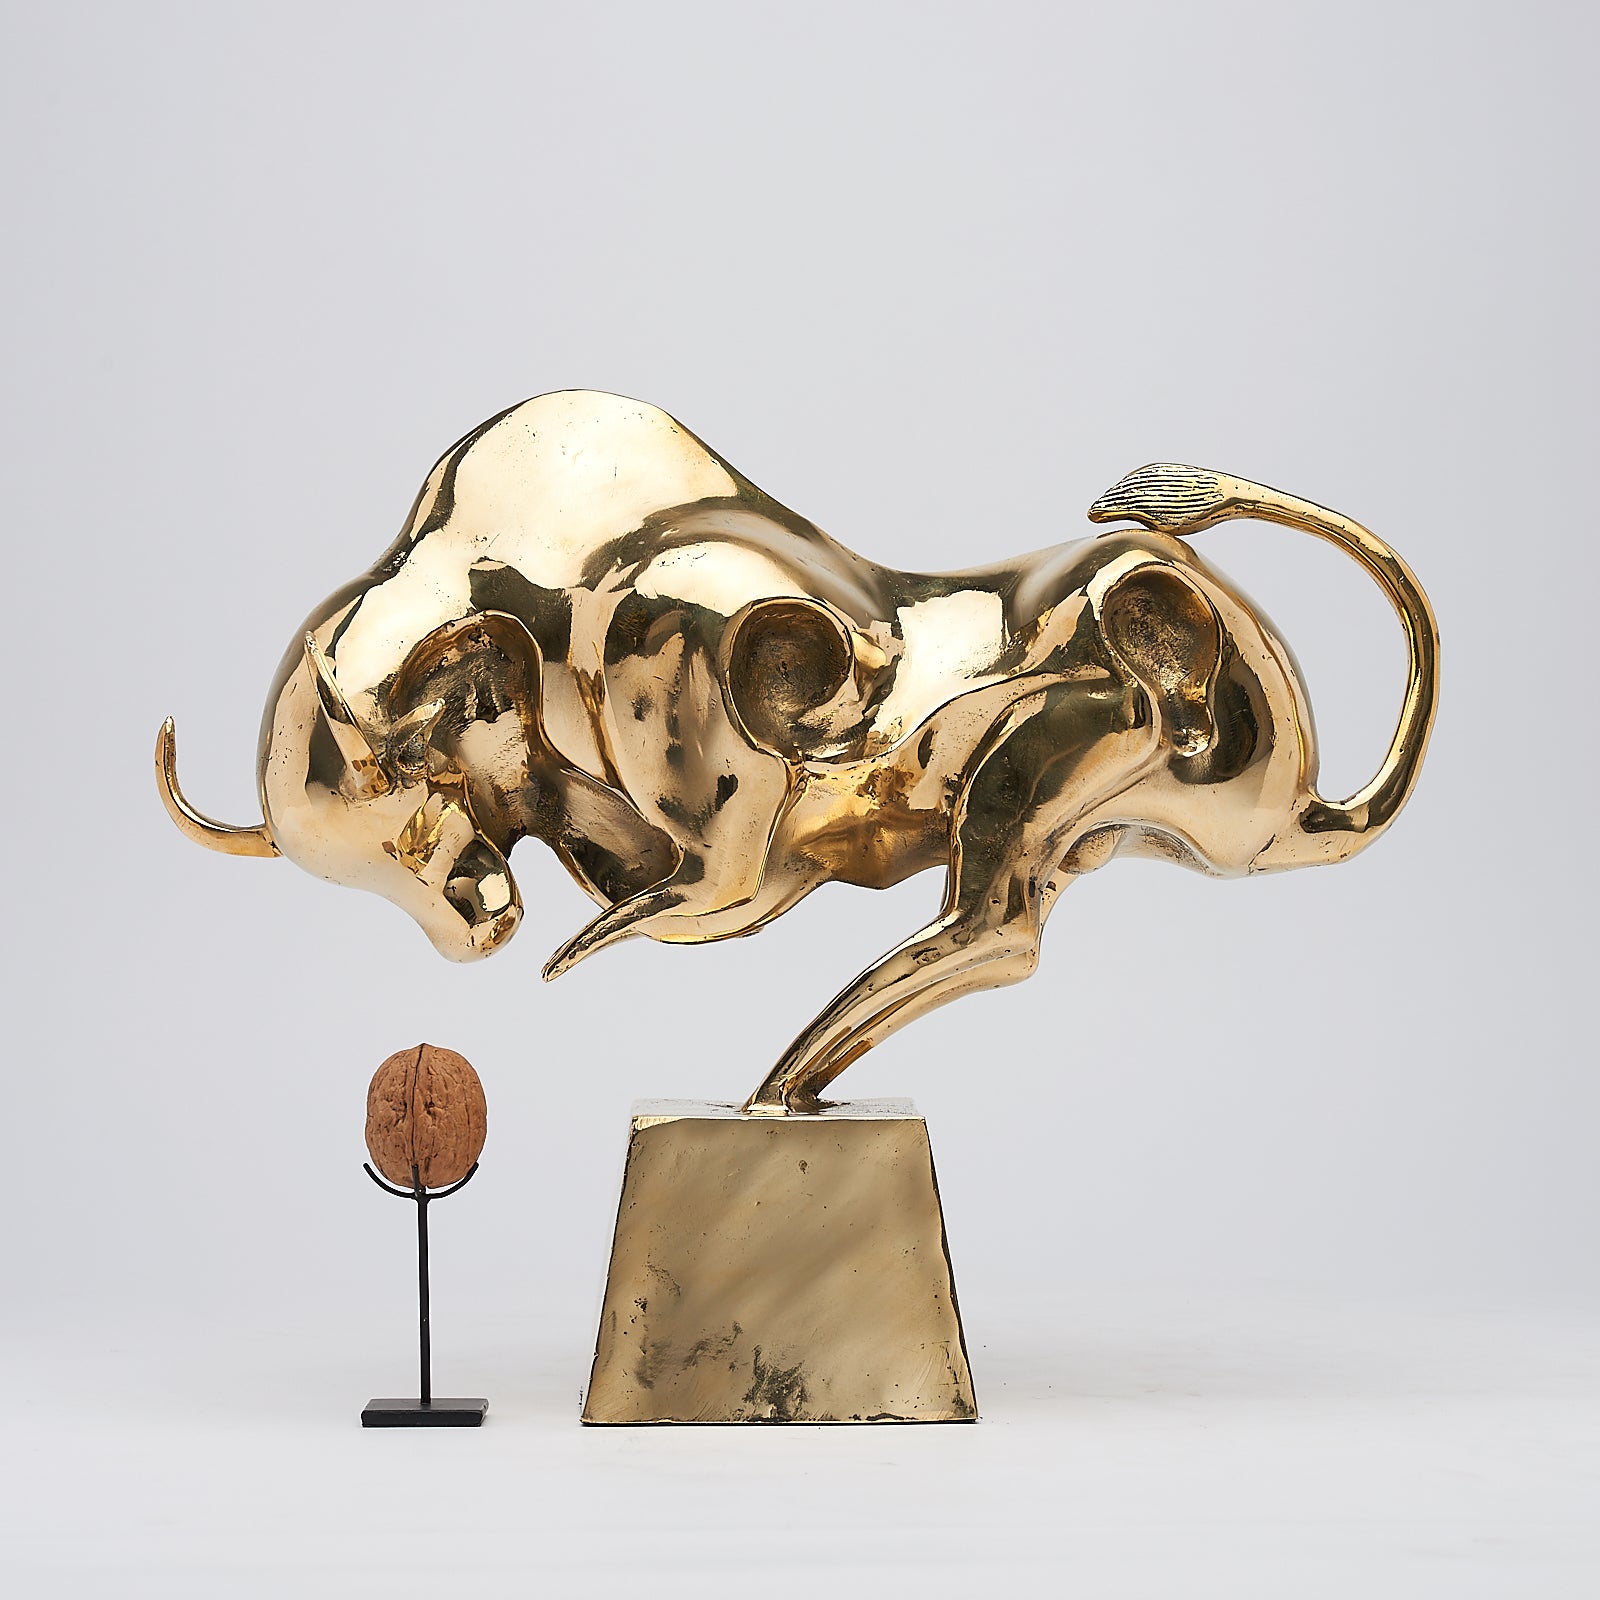 Cubist Bull in polished bronze